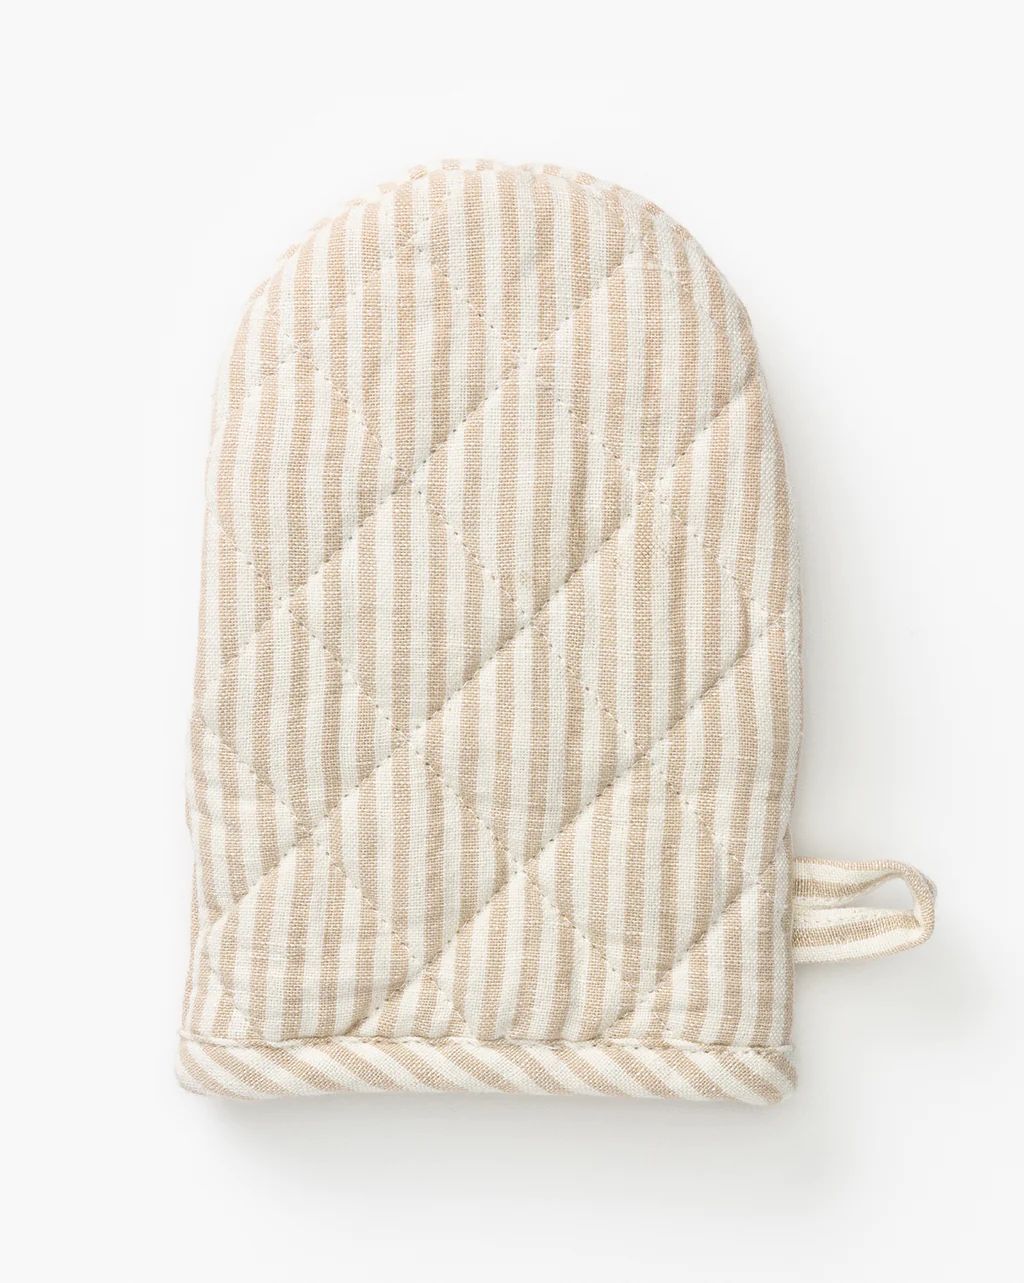 French Linen Oven Mitt | McGee & Co.